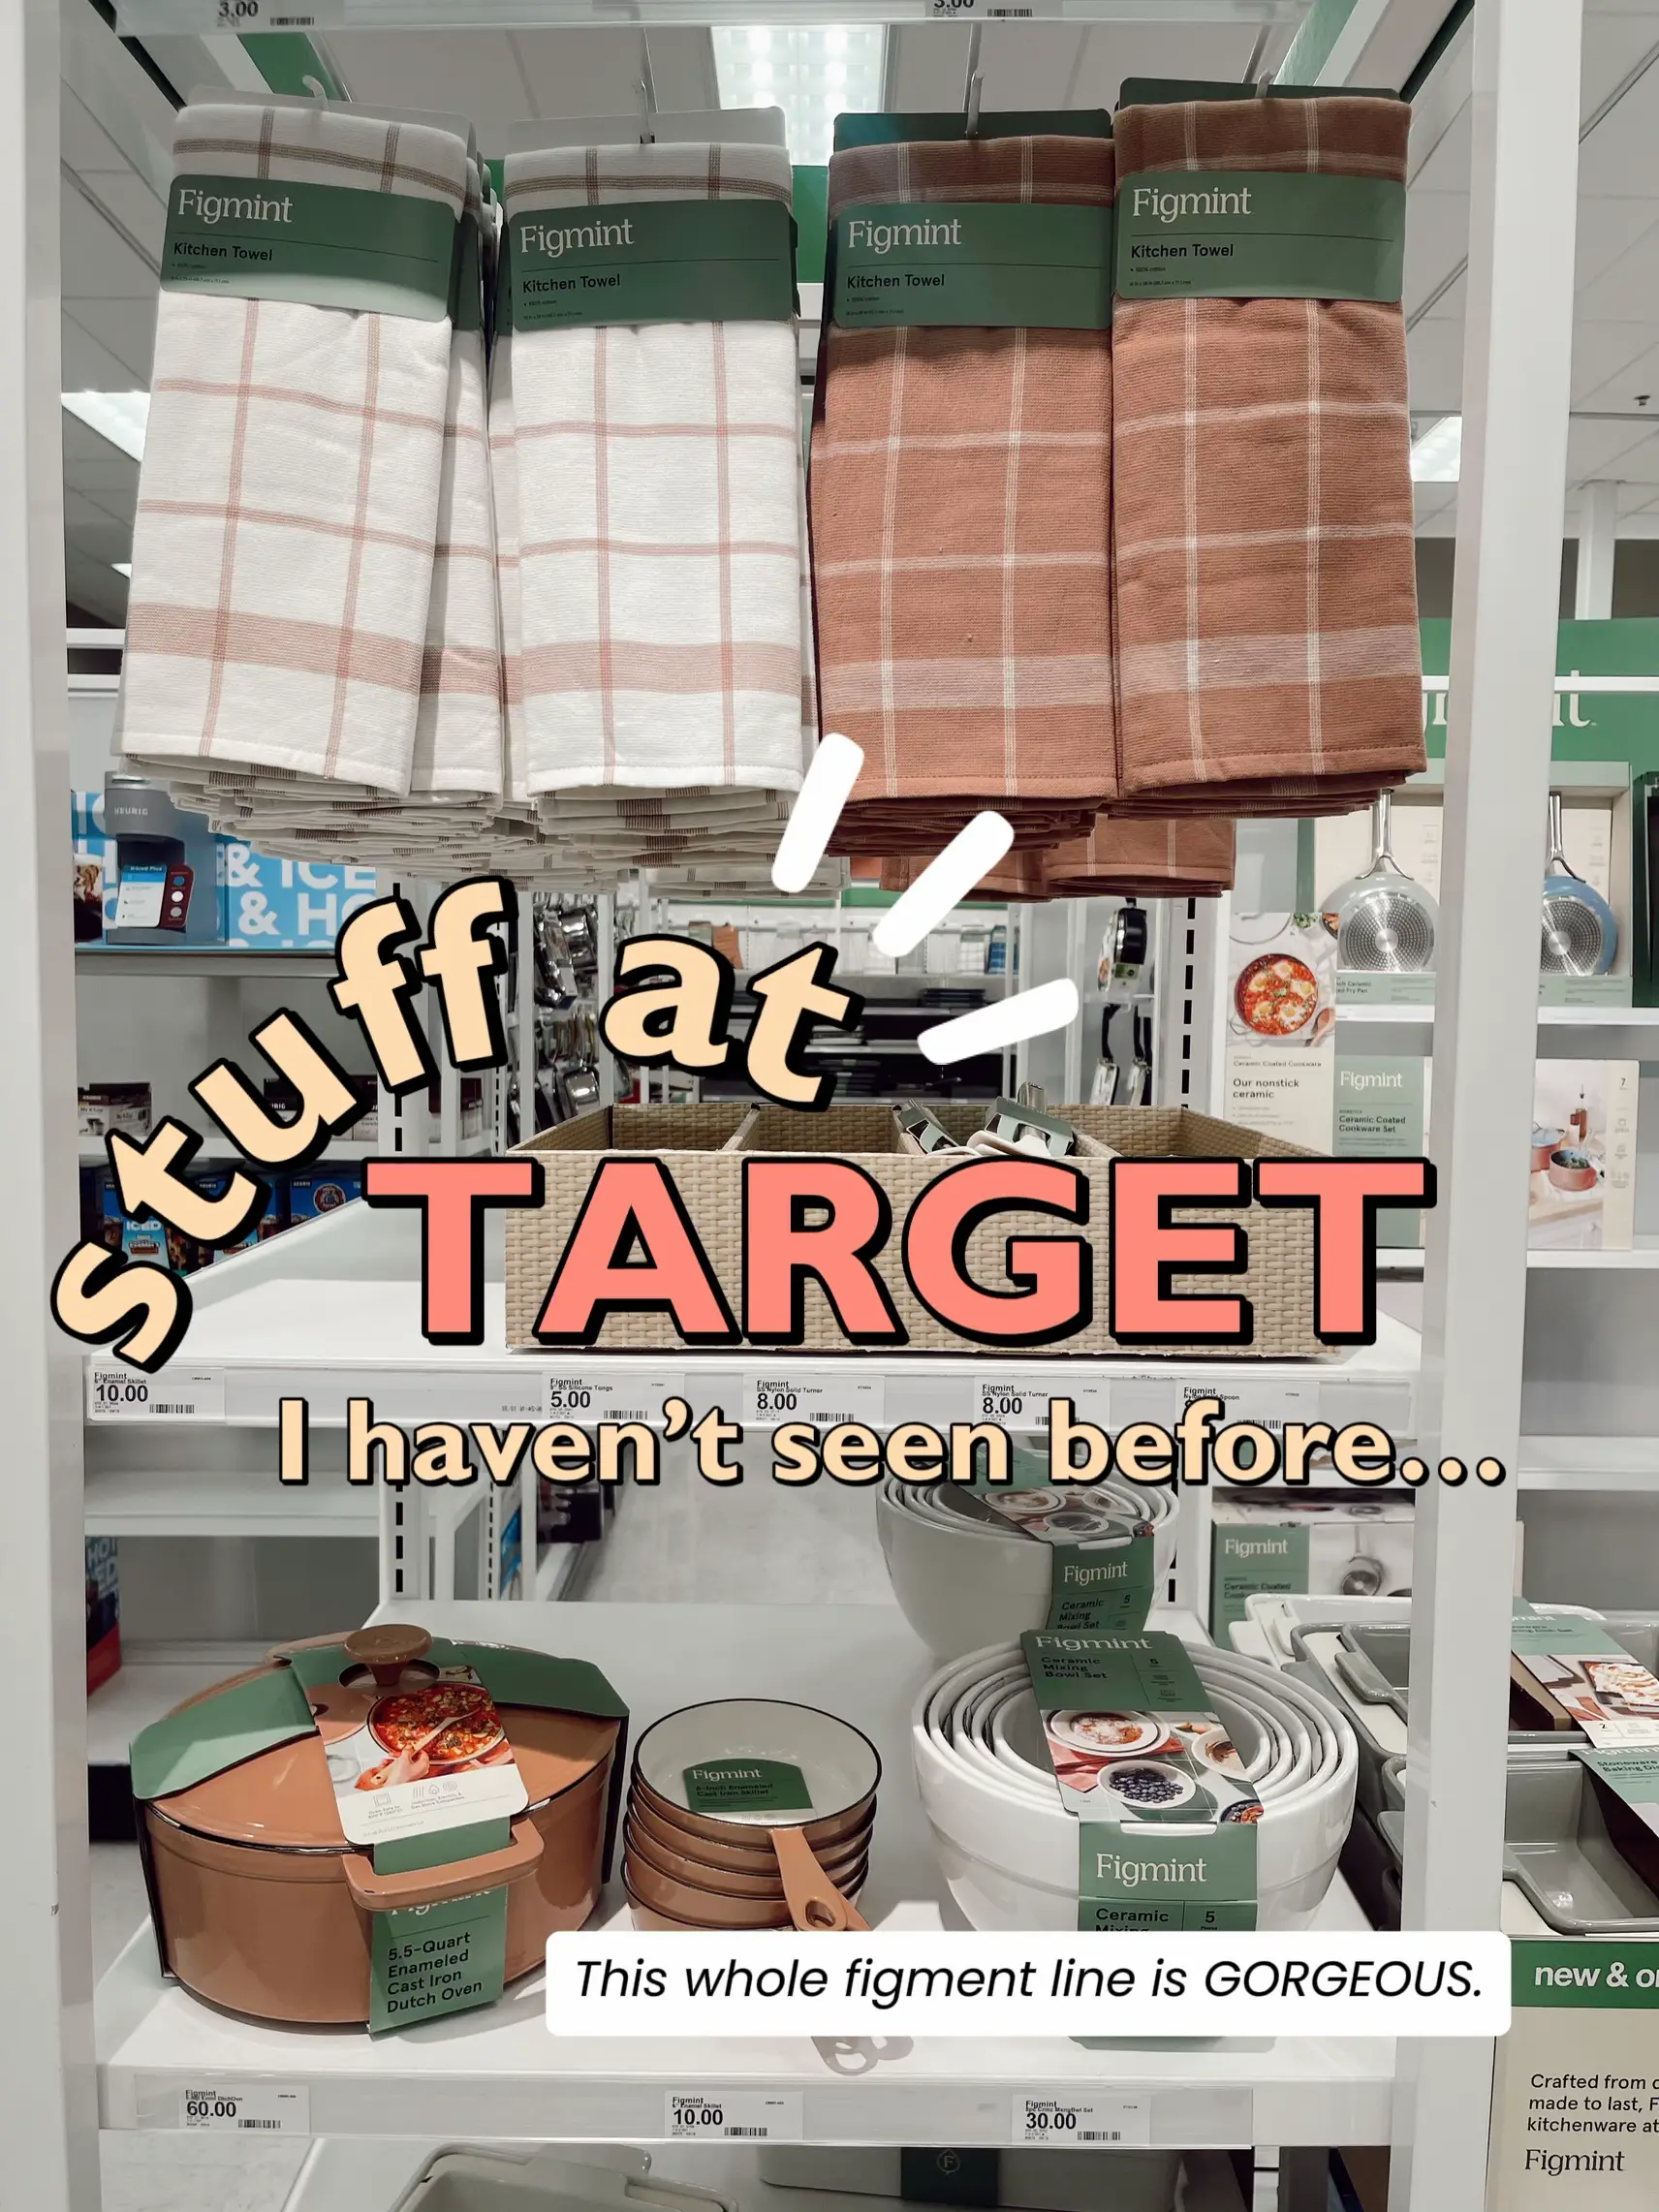 Take a First Look at Target's New Kitchen Brand, Figmint